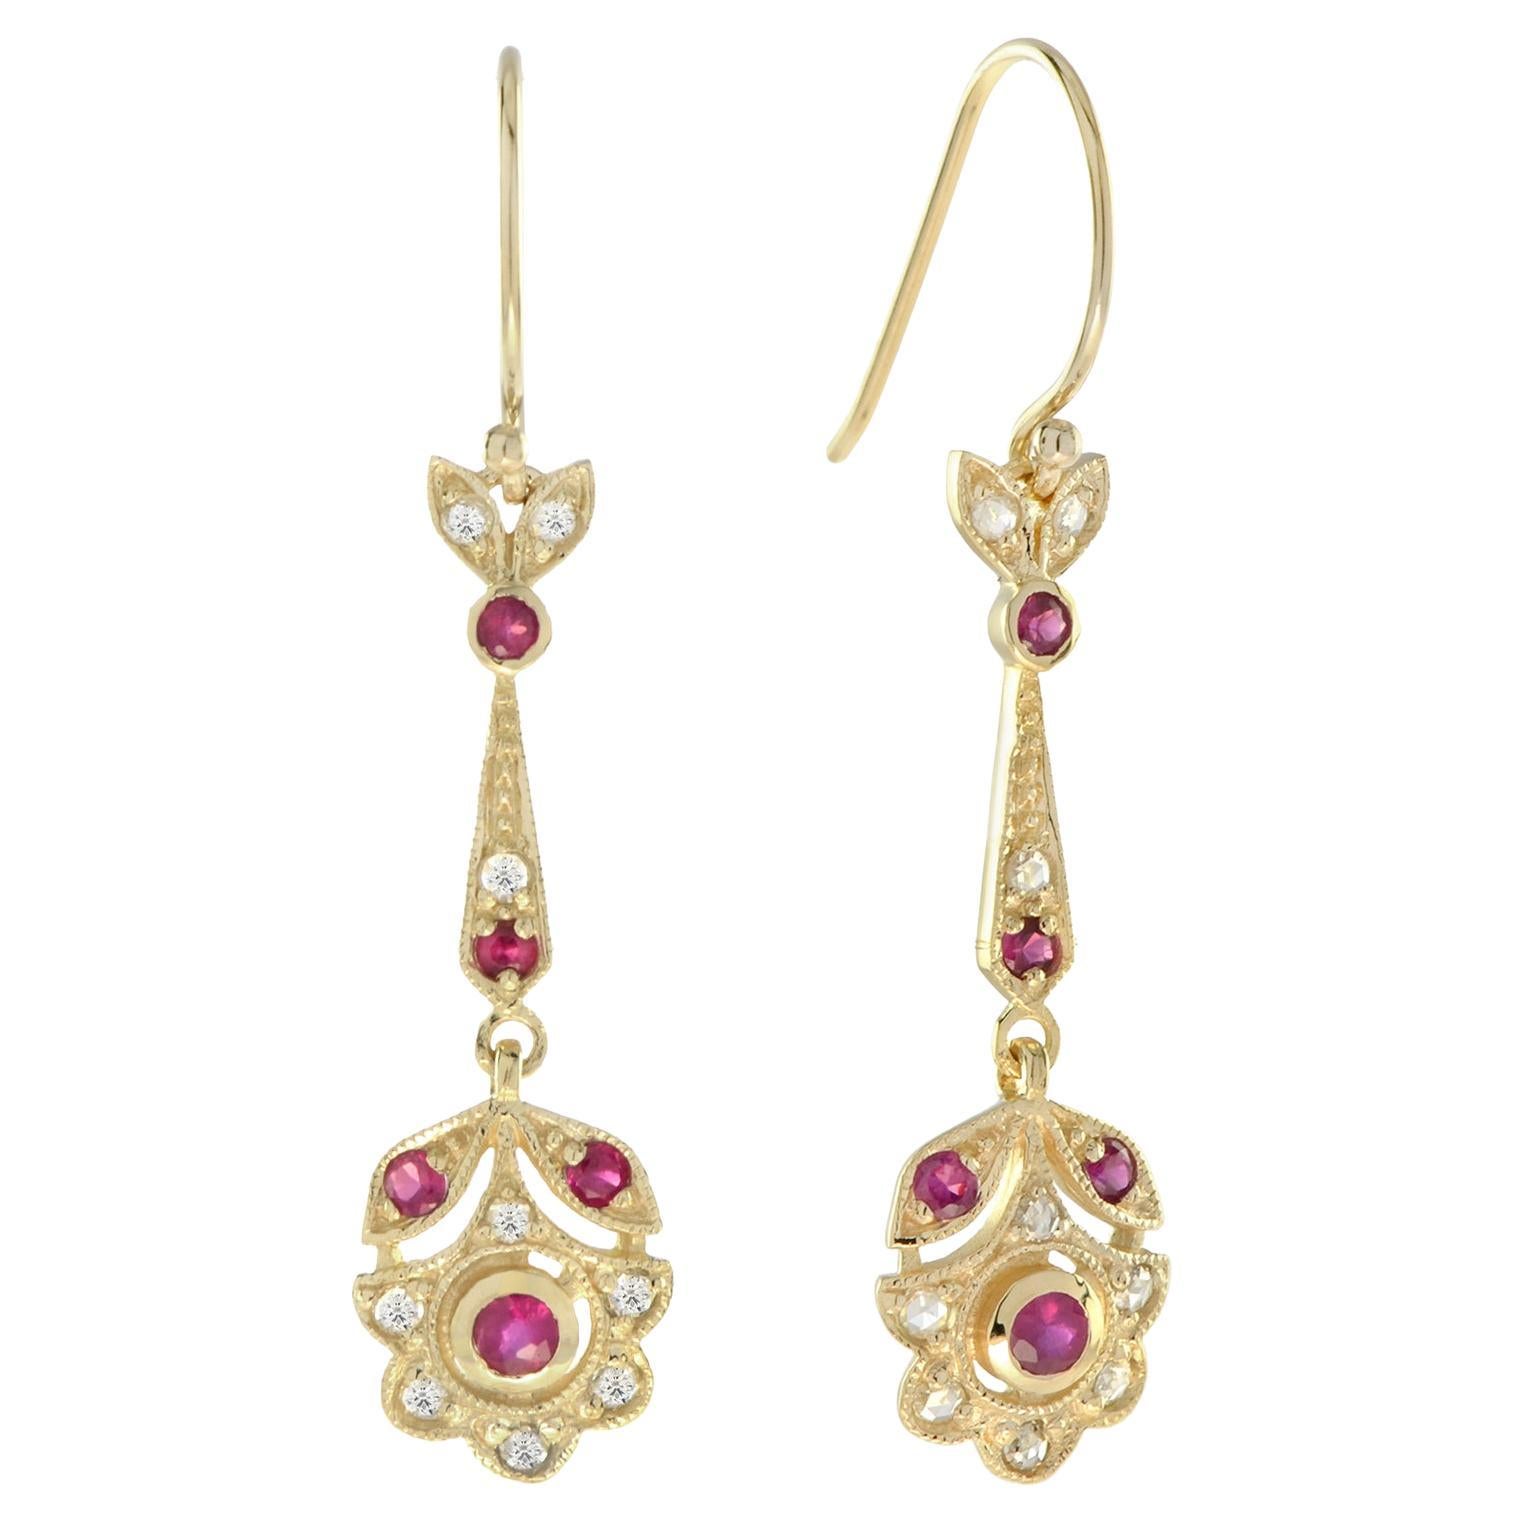 Fleur Vintage Style Ruby and Diamond Drop Earrings in 9K Yellow Gold